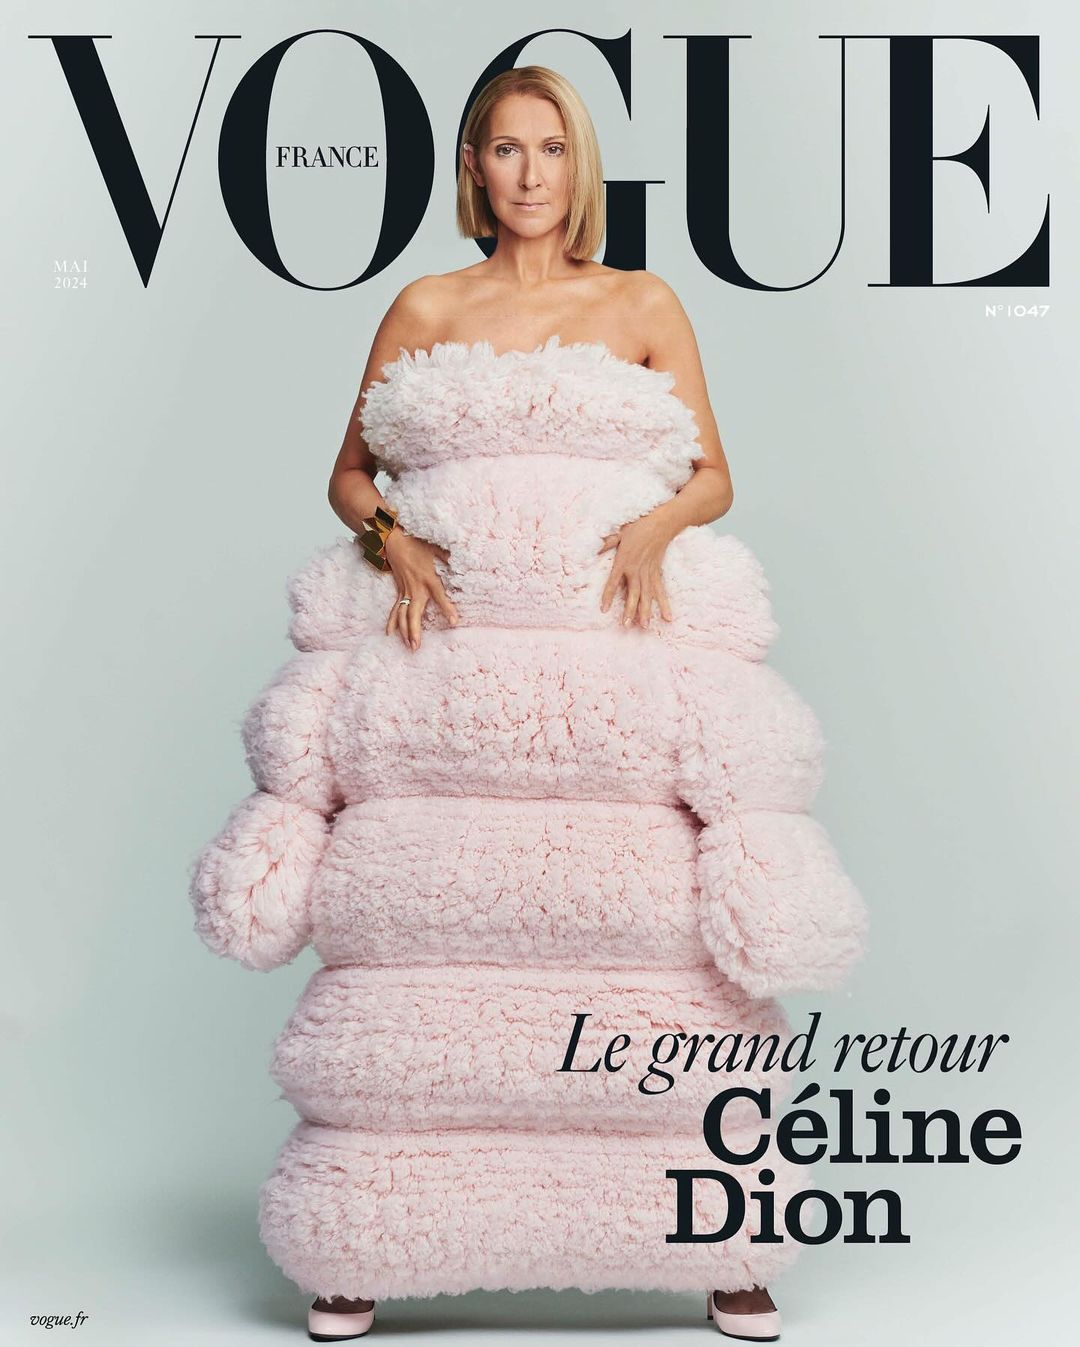 Celine Dion Is Vogue France's May 2024 Cover Star